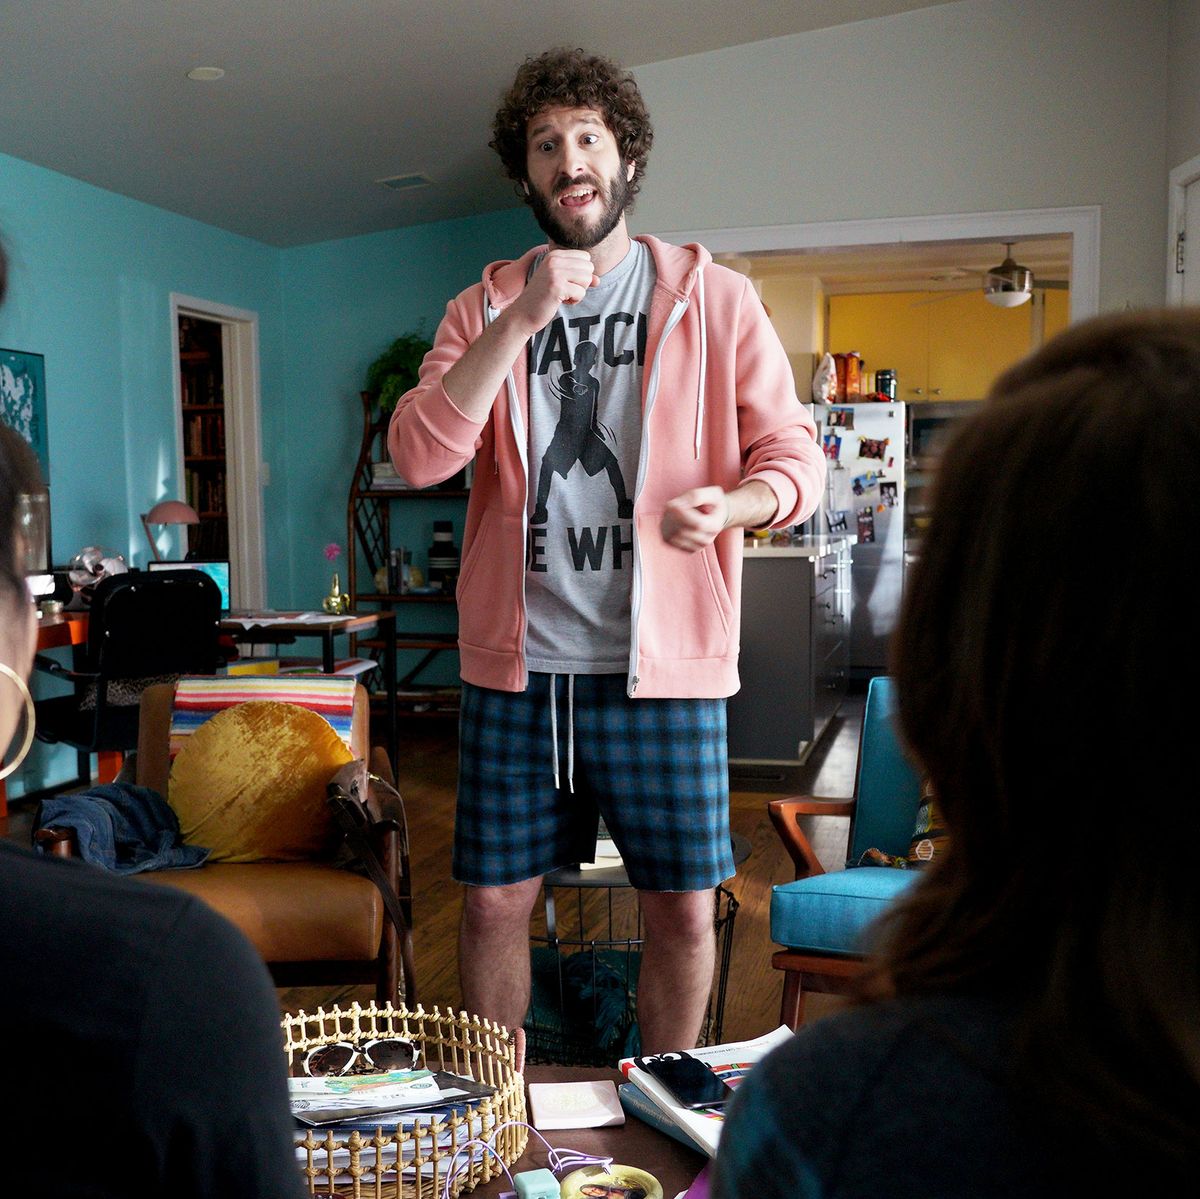 lil dicky professional rapper album download pirate bay